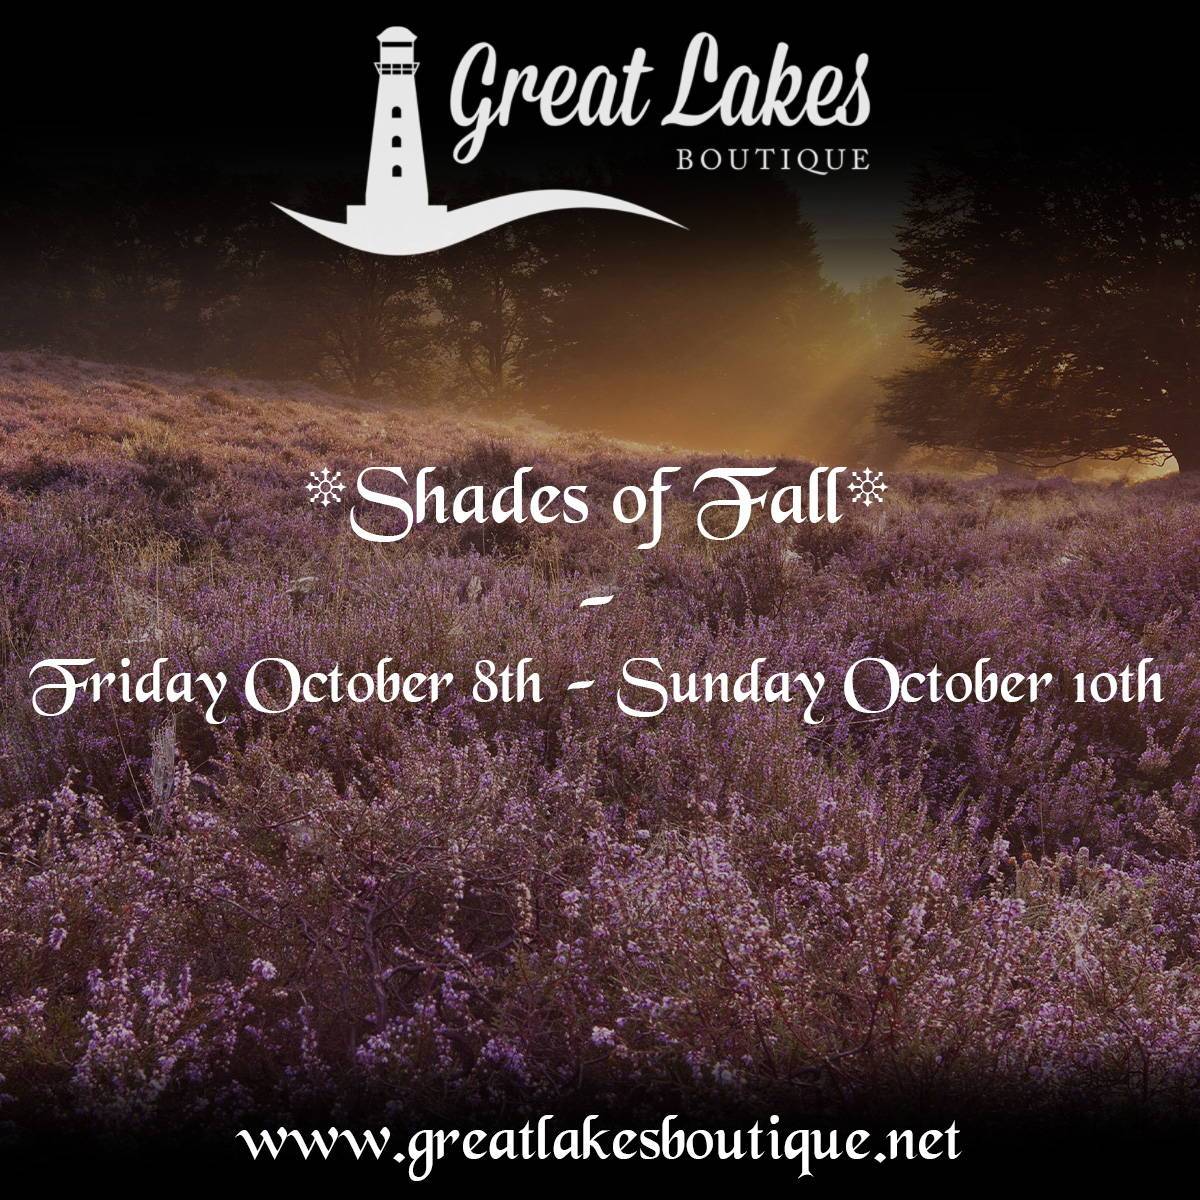 Great Lakes Boutique Shades of Fall Online Event